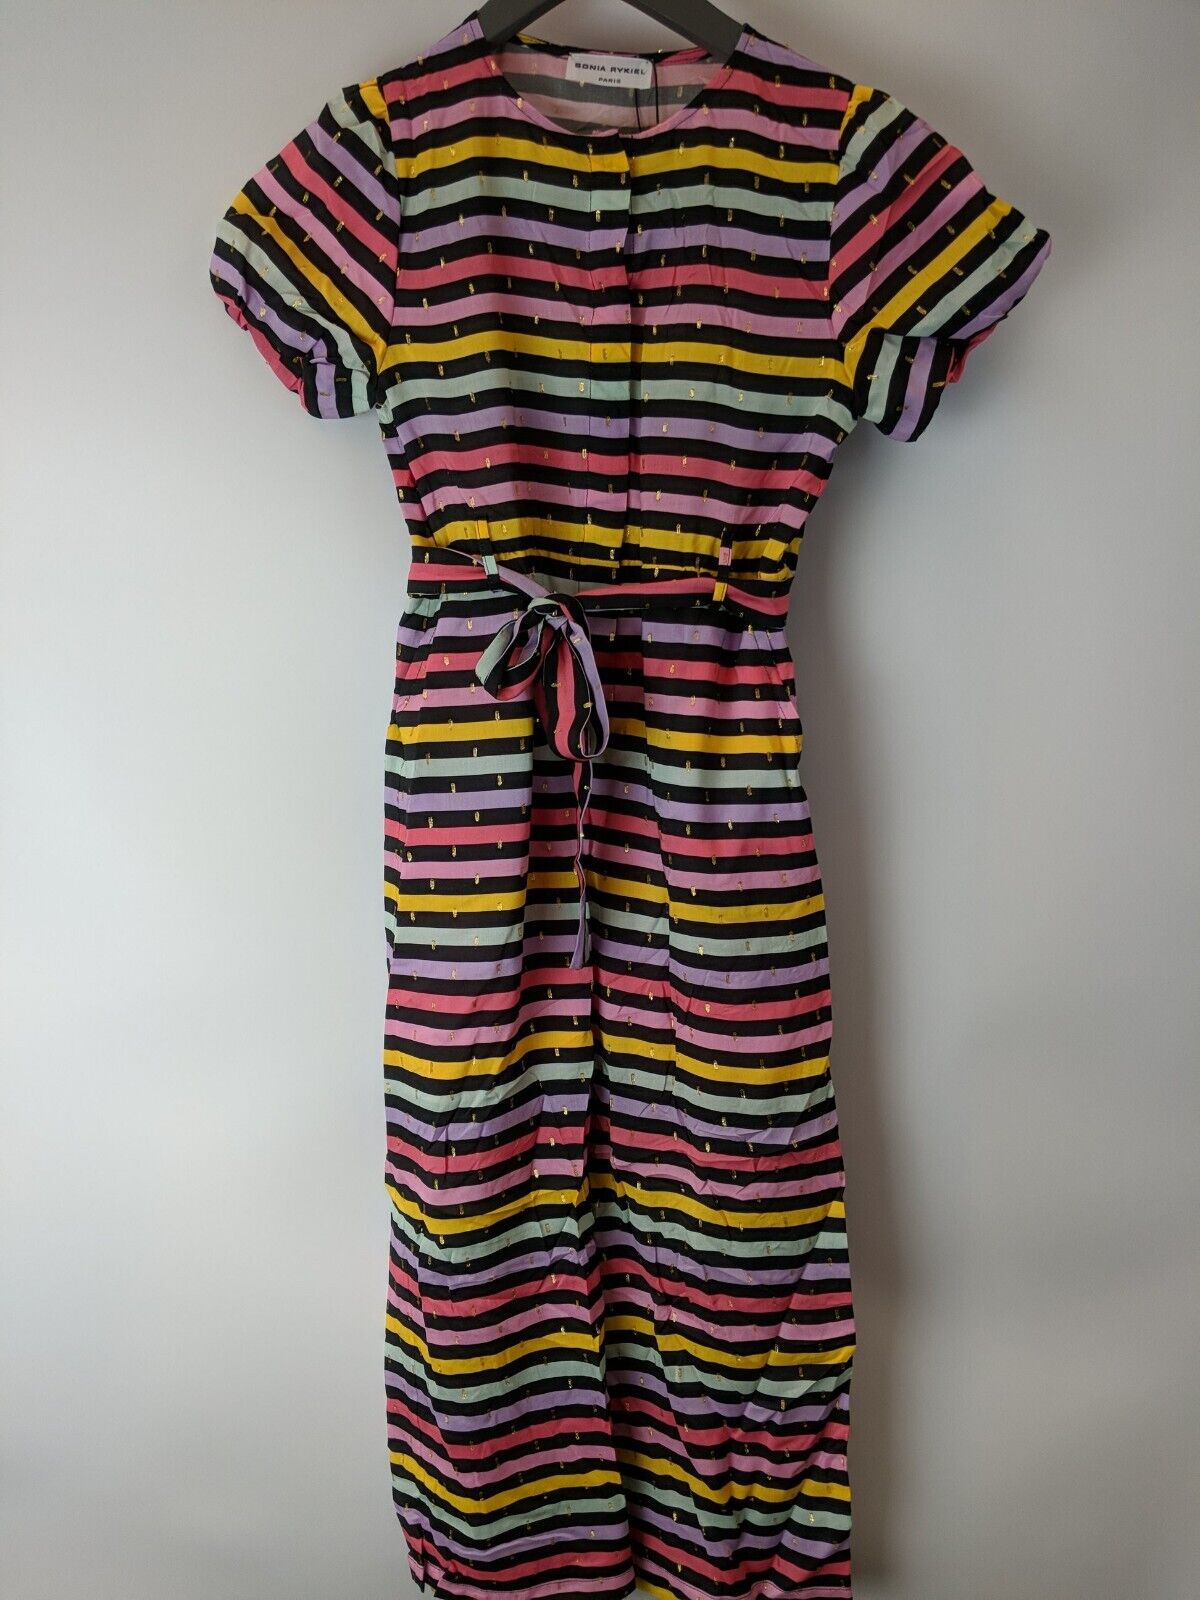 Sonia Rykiel Girl's Striped Jumpsuit Size 4 Years **** V391